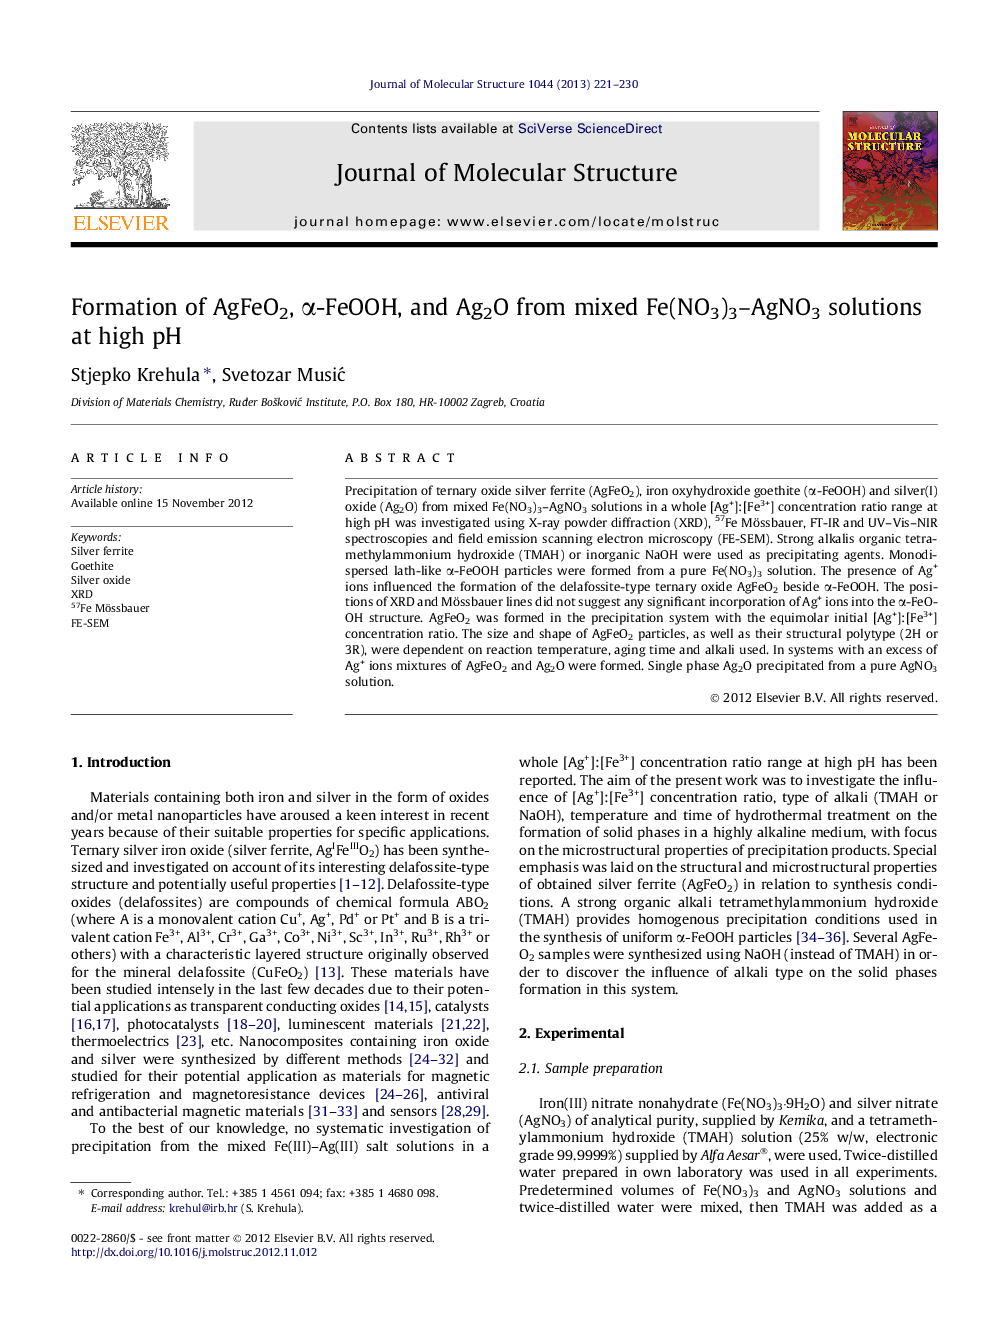 Formation of AgFeO2, α-FeOOH, and Ag2O from mixed Fe(NO3)3–AgNO3 solutions at high pH